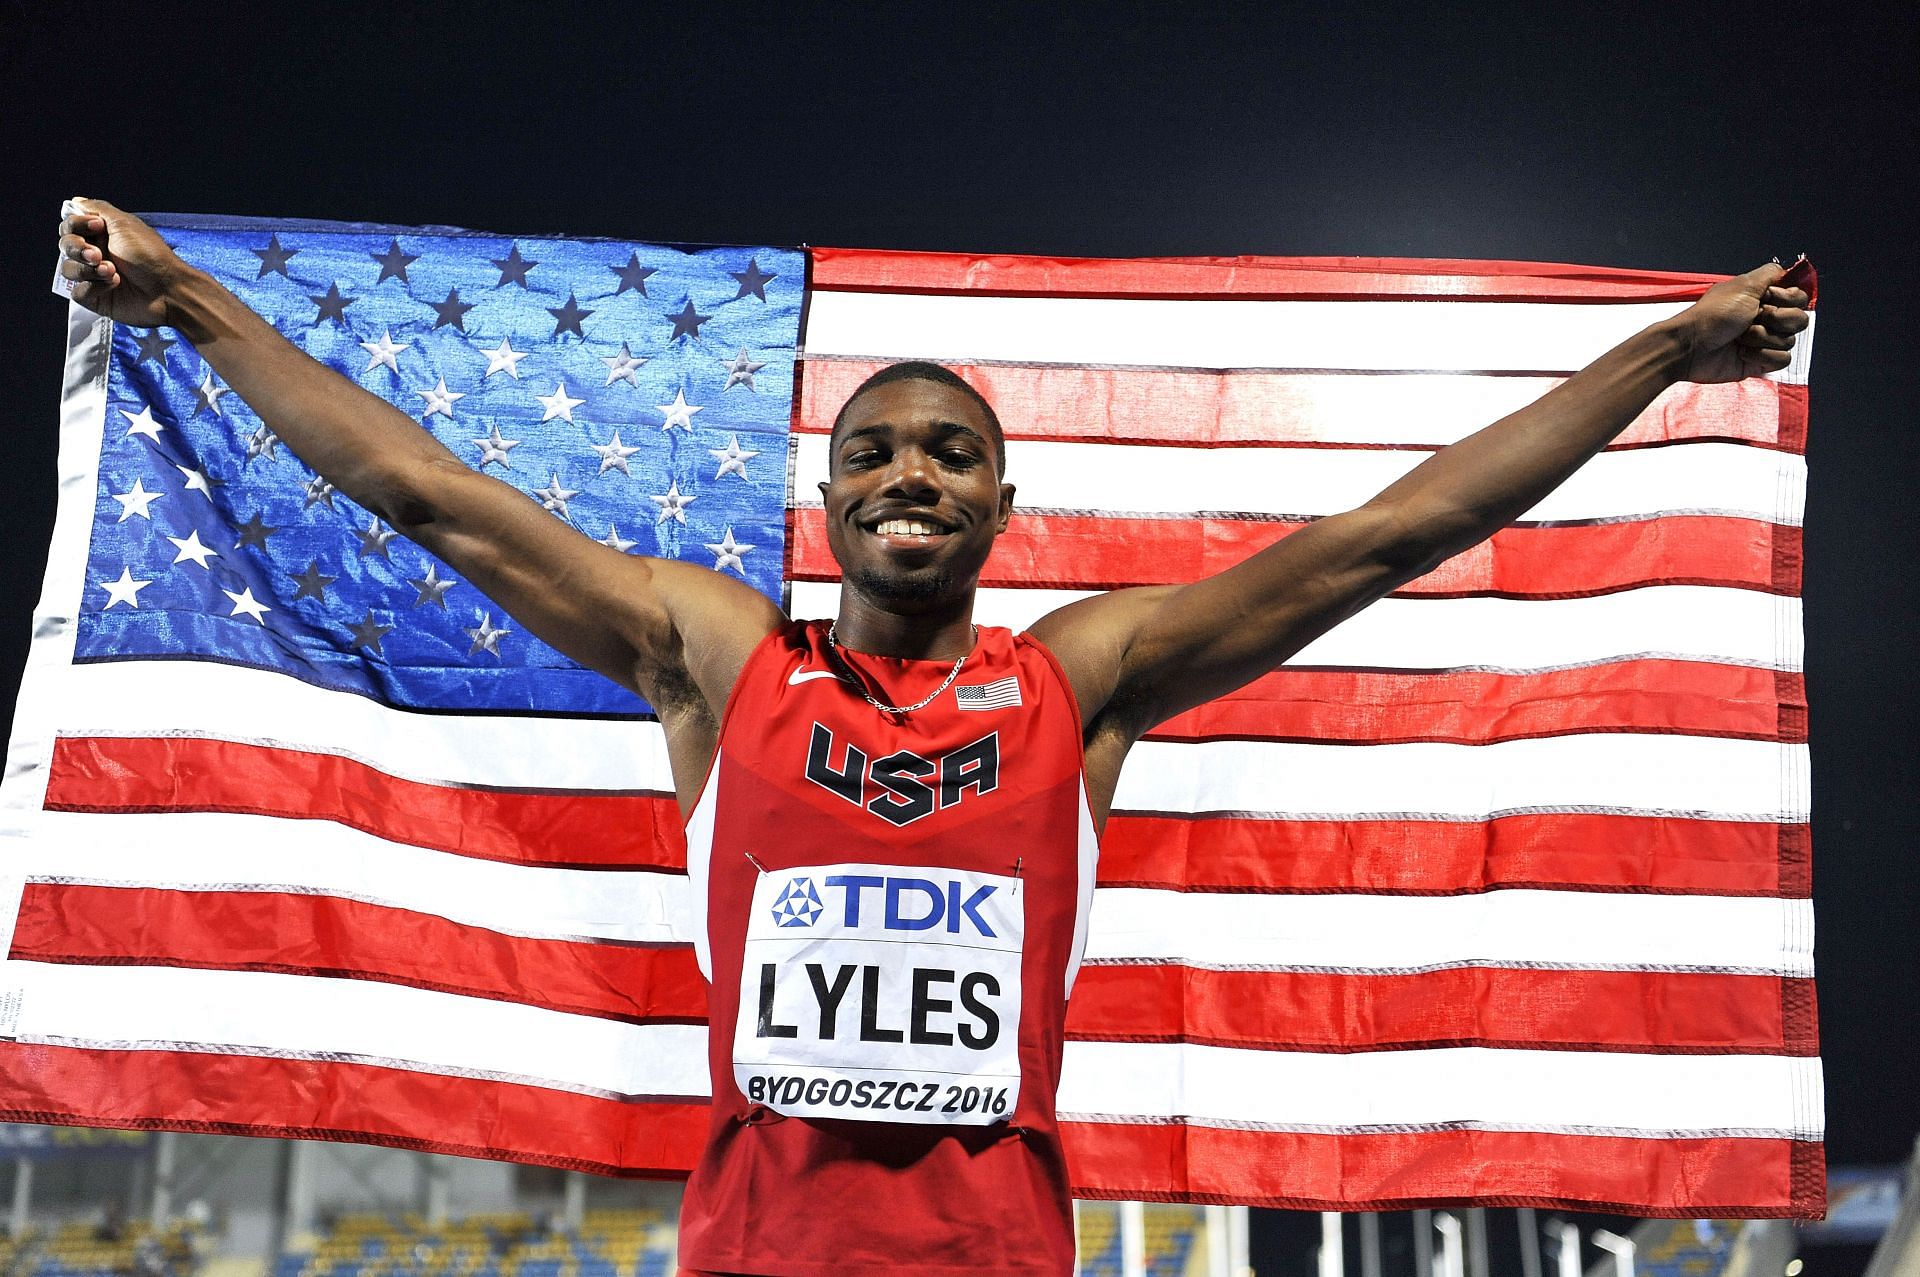 Noah Lyles from the USA celebrates victory in the Men&#039;s 100-meter final at the IAAF World U20 Championships 2016. (Photo by Adam Nurkiewicz/Getty Images)